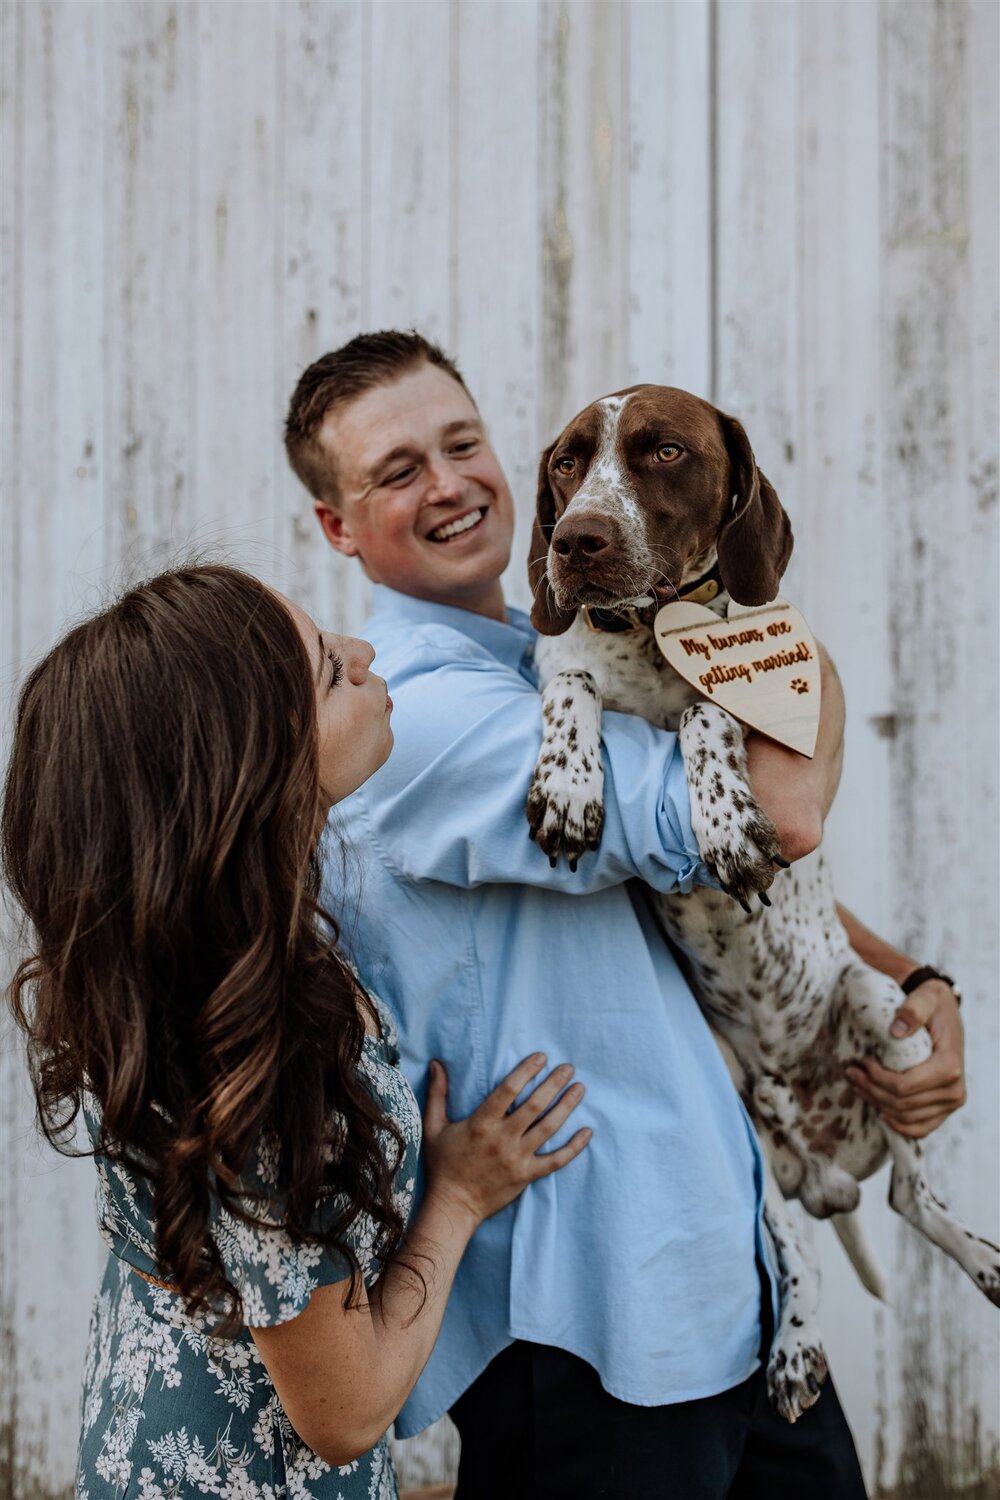 in-home-barn-engagement-shoot-6